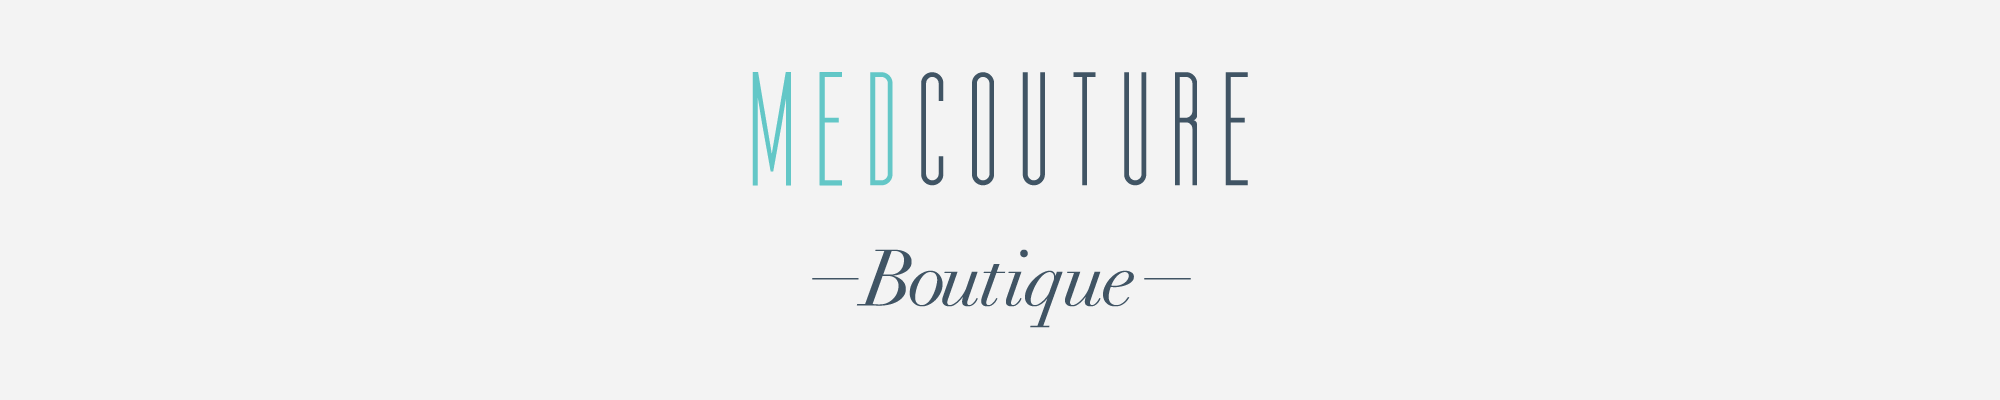 Med Couture Boutique